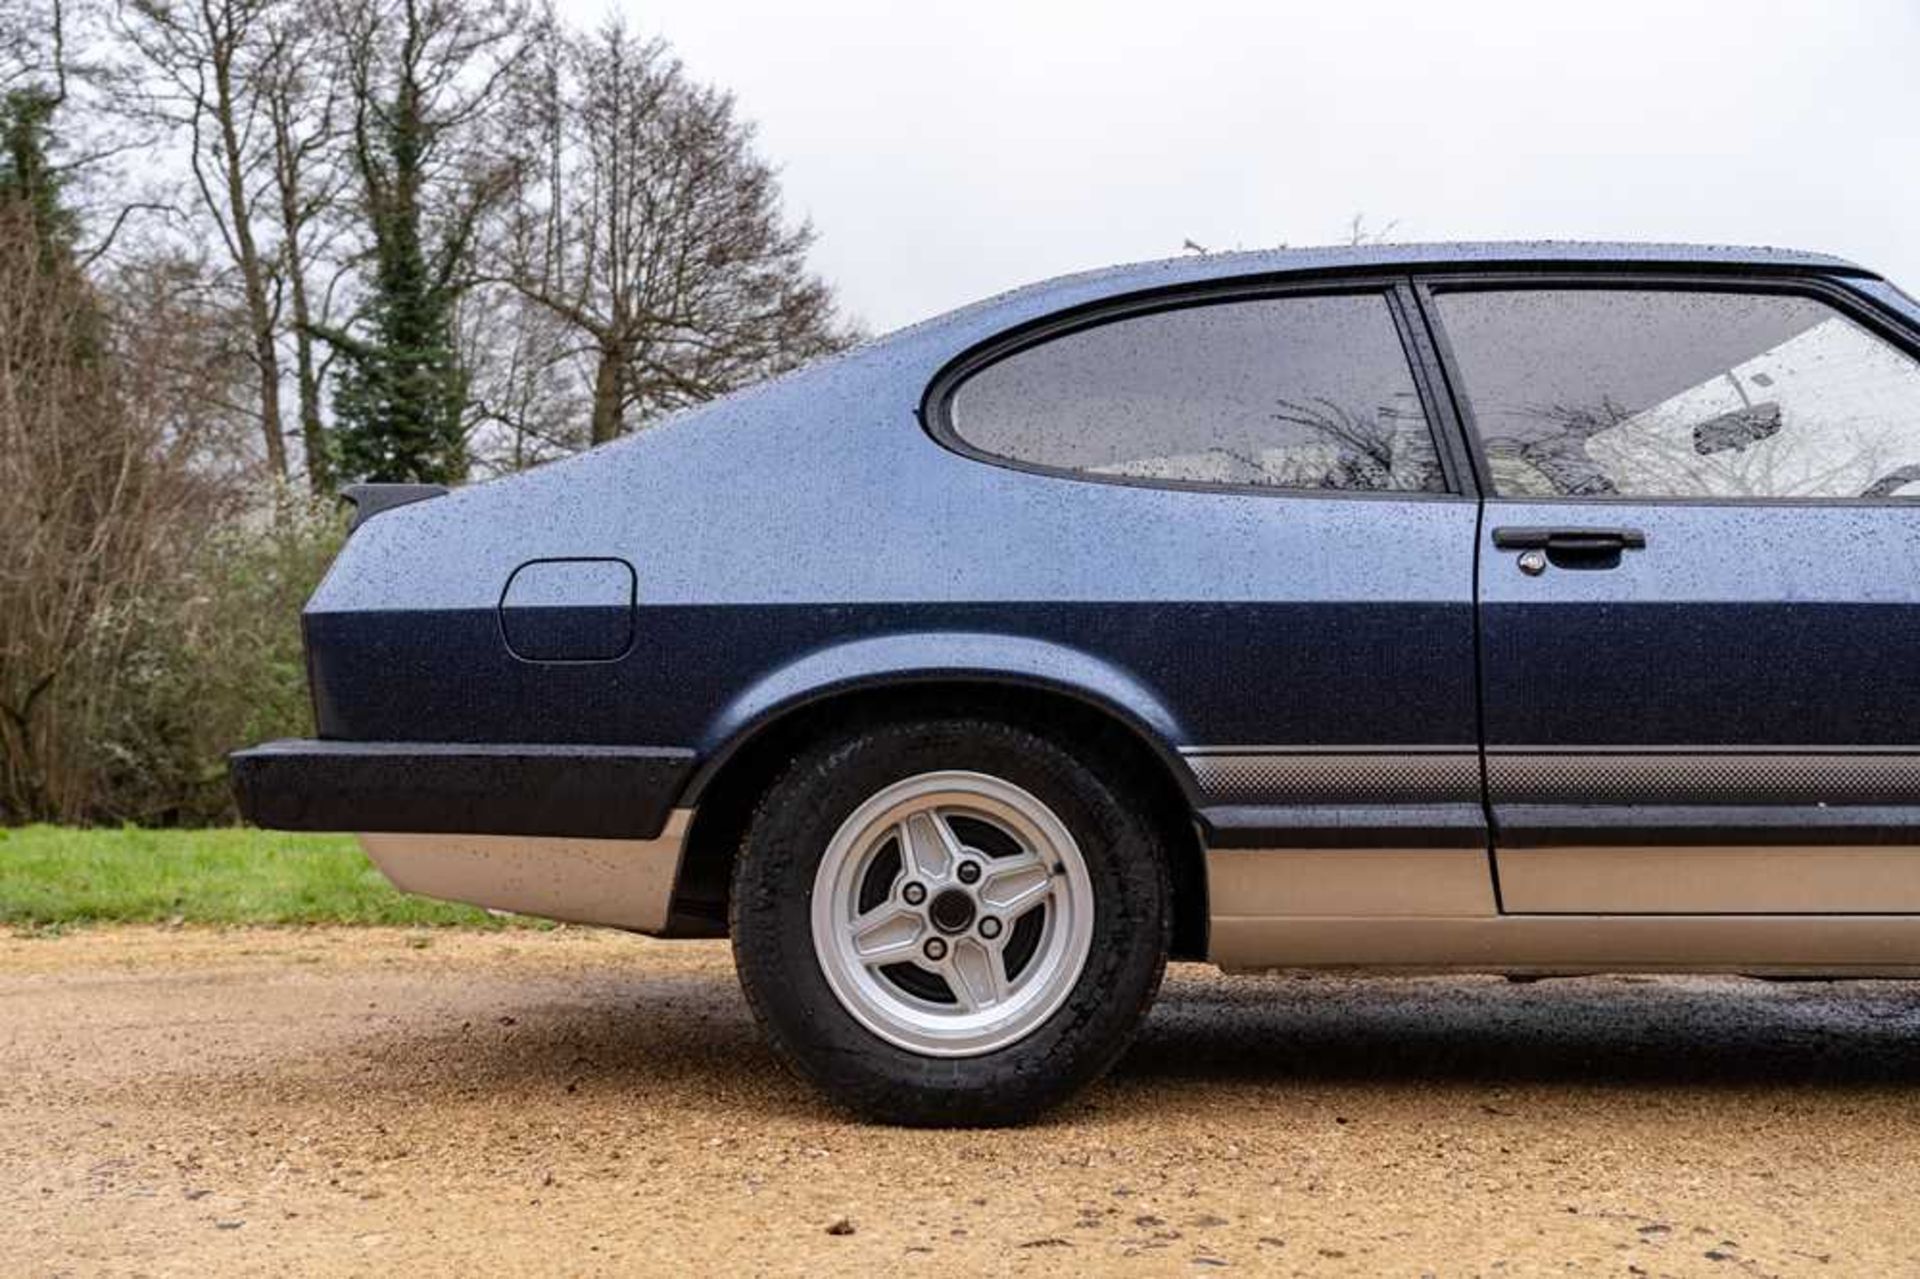 1985 Ford Capri Laser 2.0 Litre Warranted 55,300 miles from new - Image 4 of 67